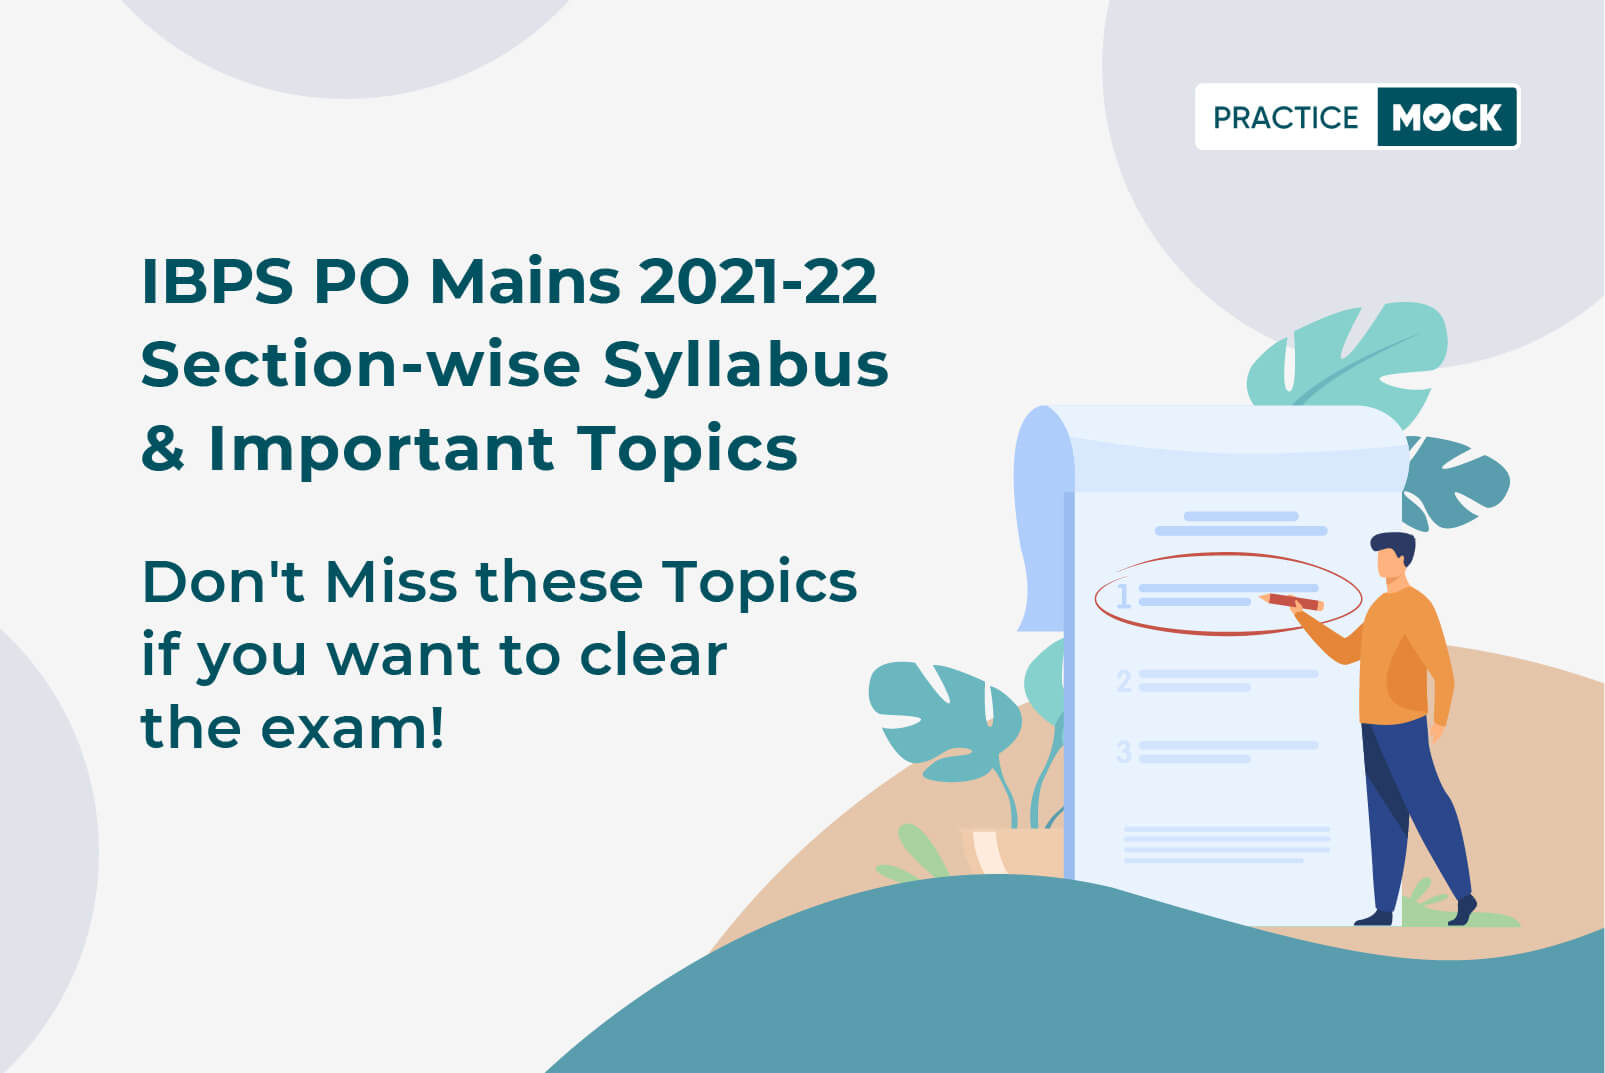 IBPS PO Mains 2021-22-Section-wise Syllabus & Important Topics